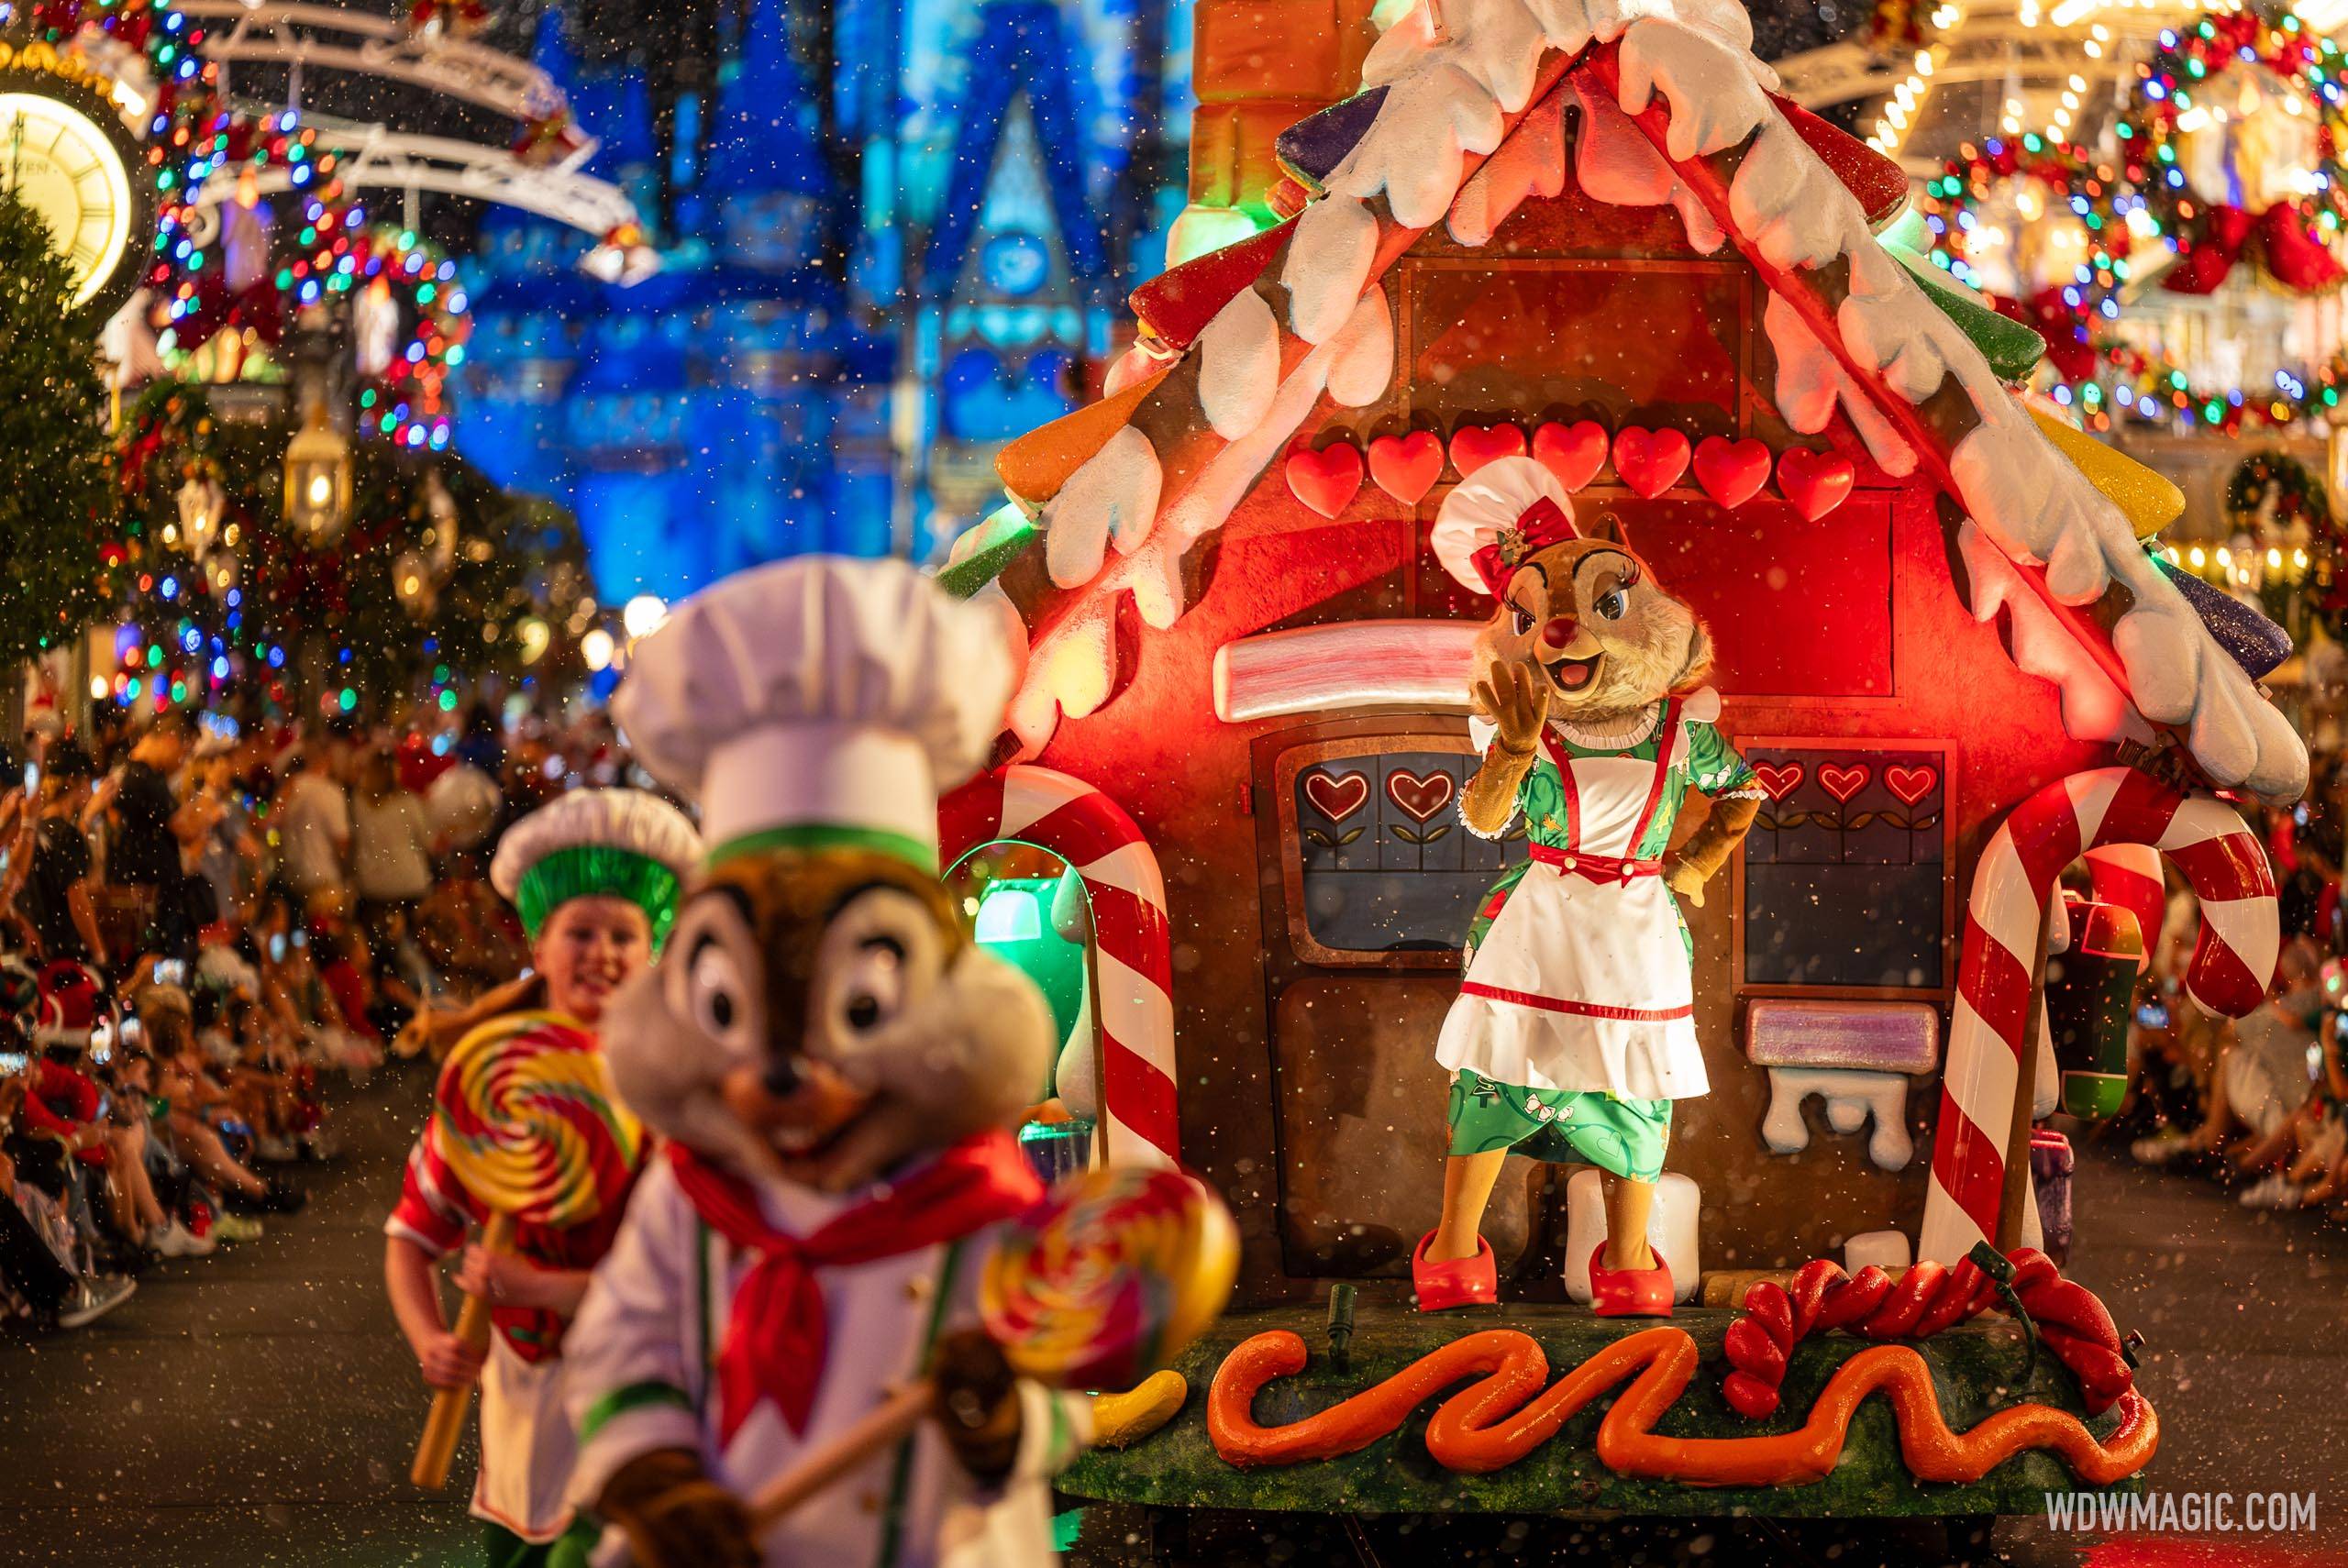 Mickey's Very Merry Christmas Party 2023 highlights